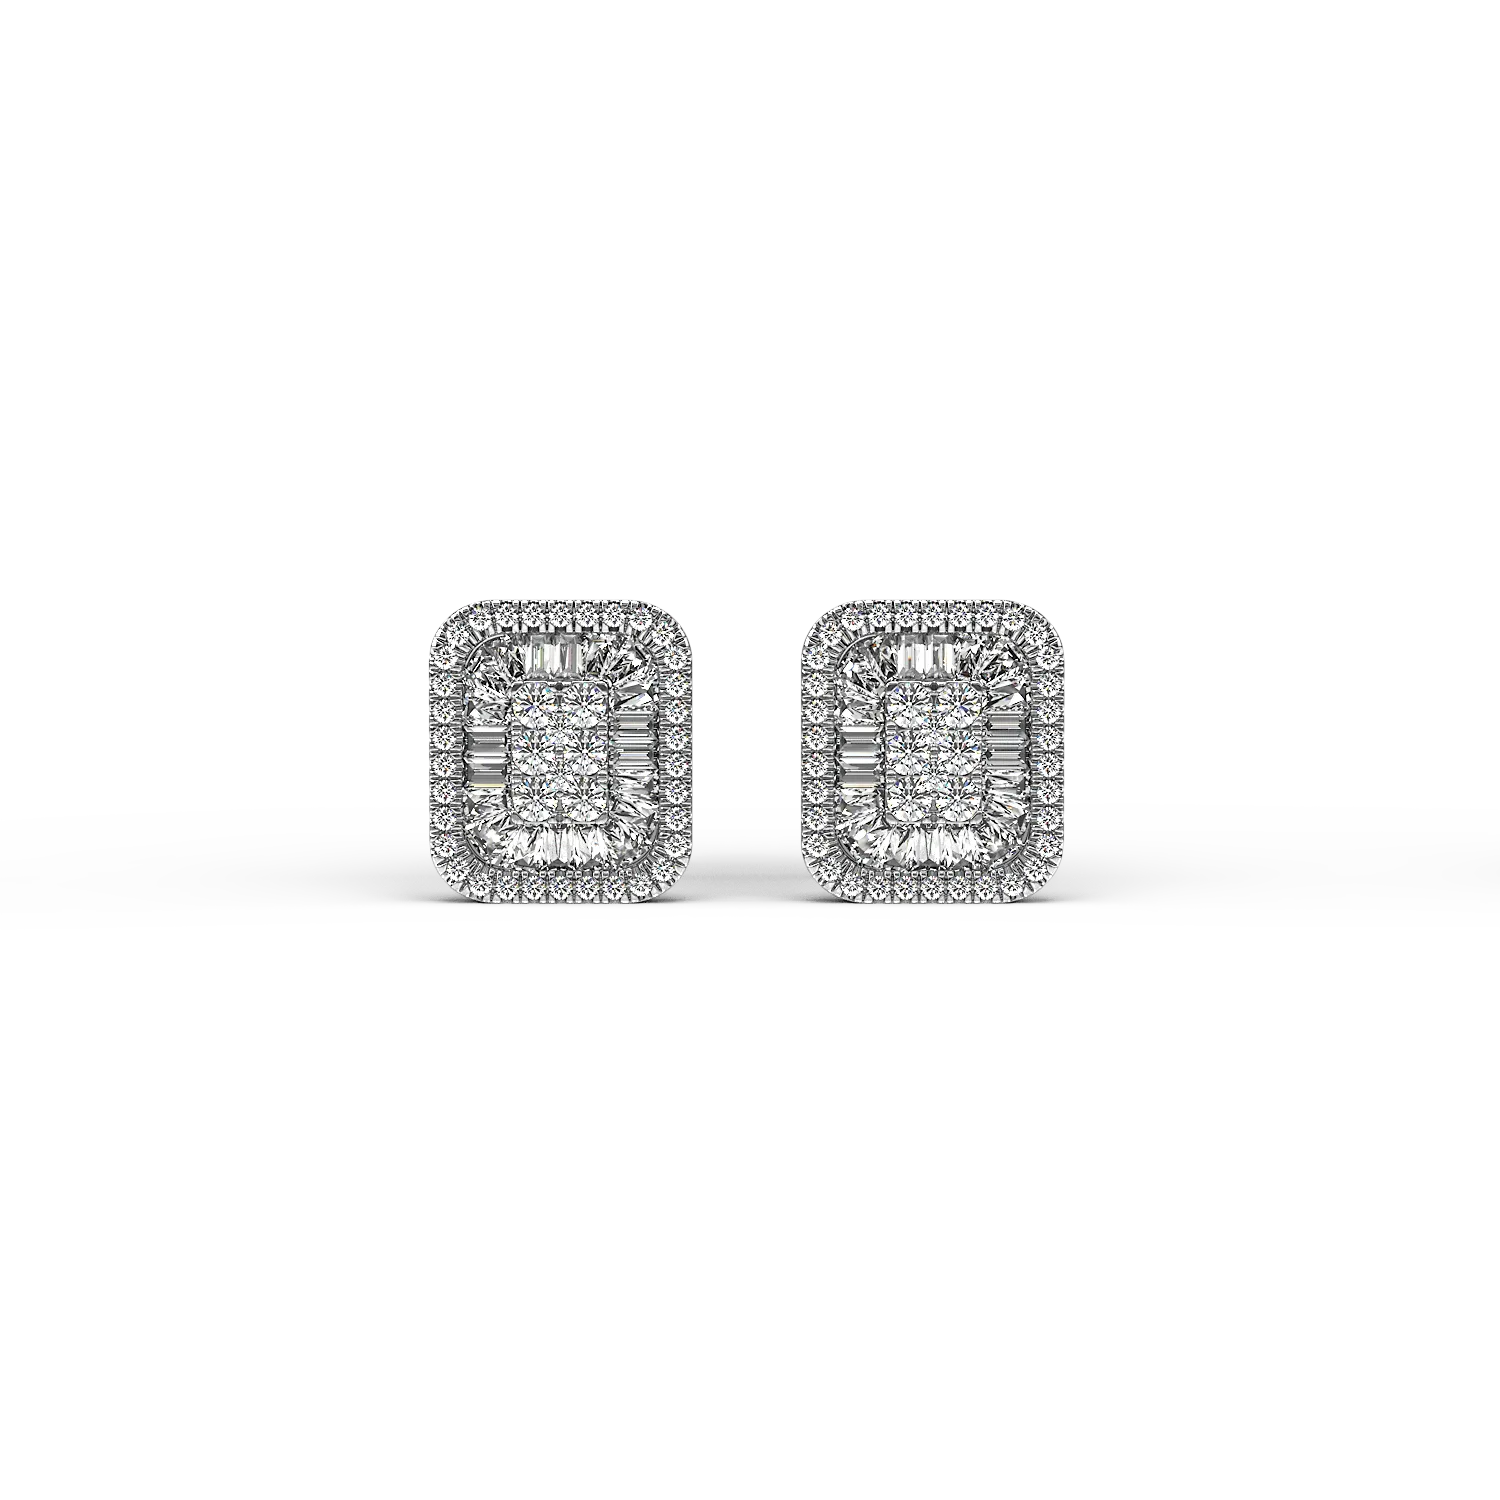 18K white gold earrings with 0.41ct diamonds